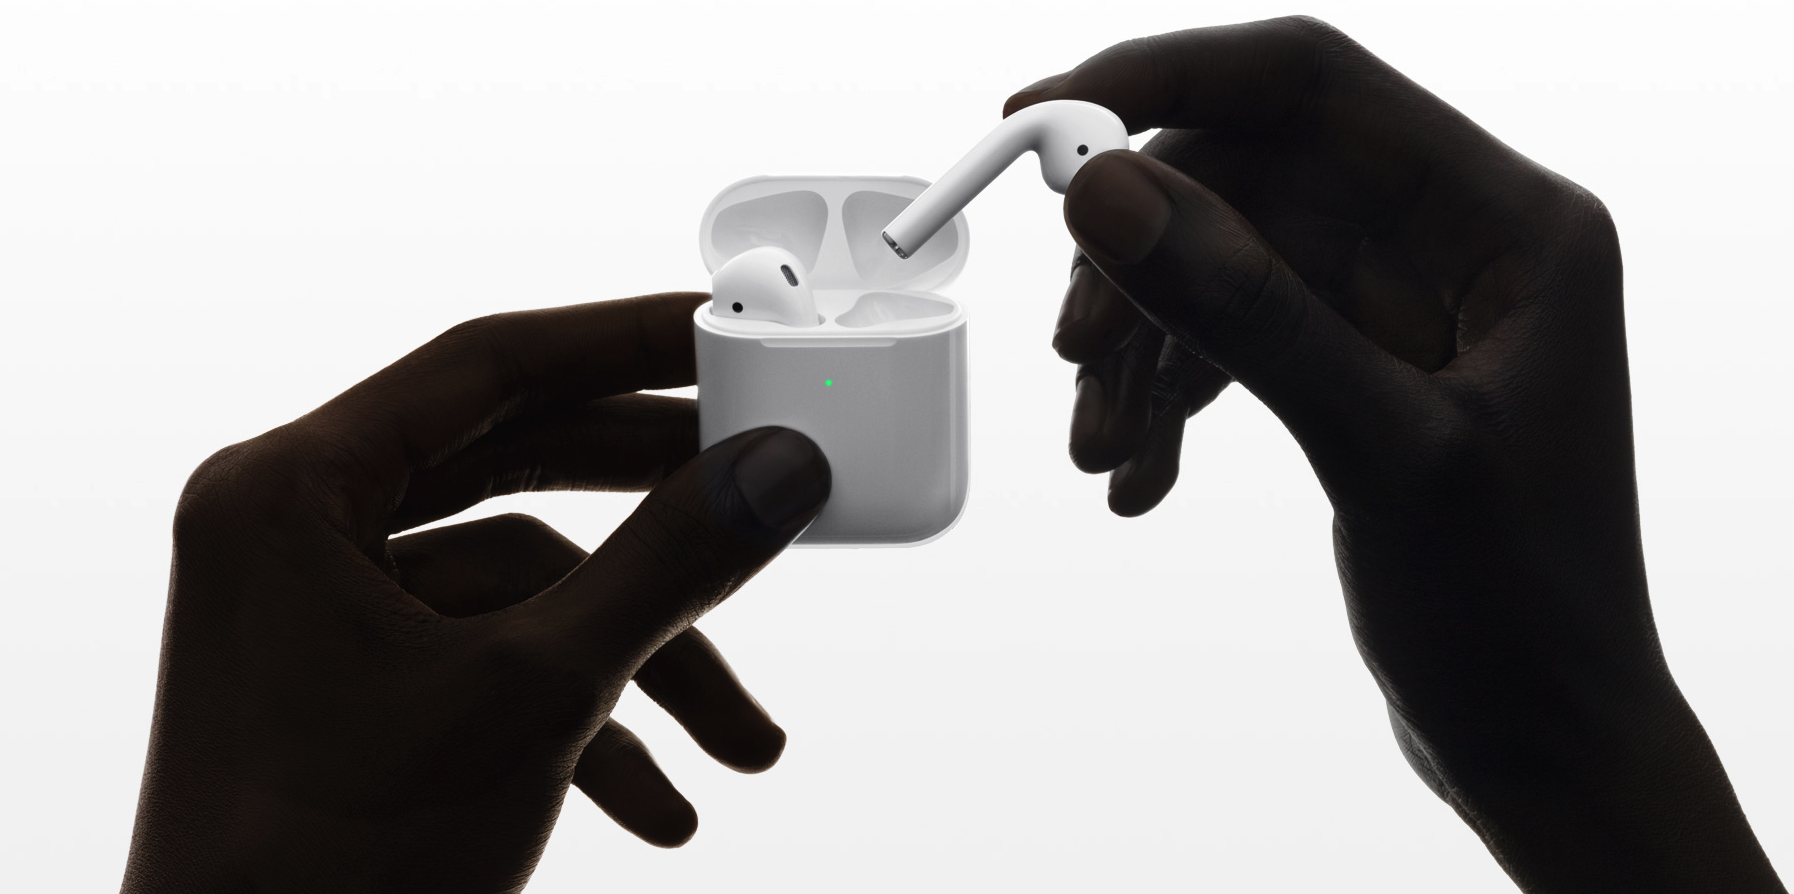 Airpods 2 - Apple